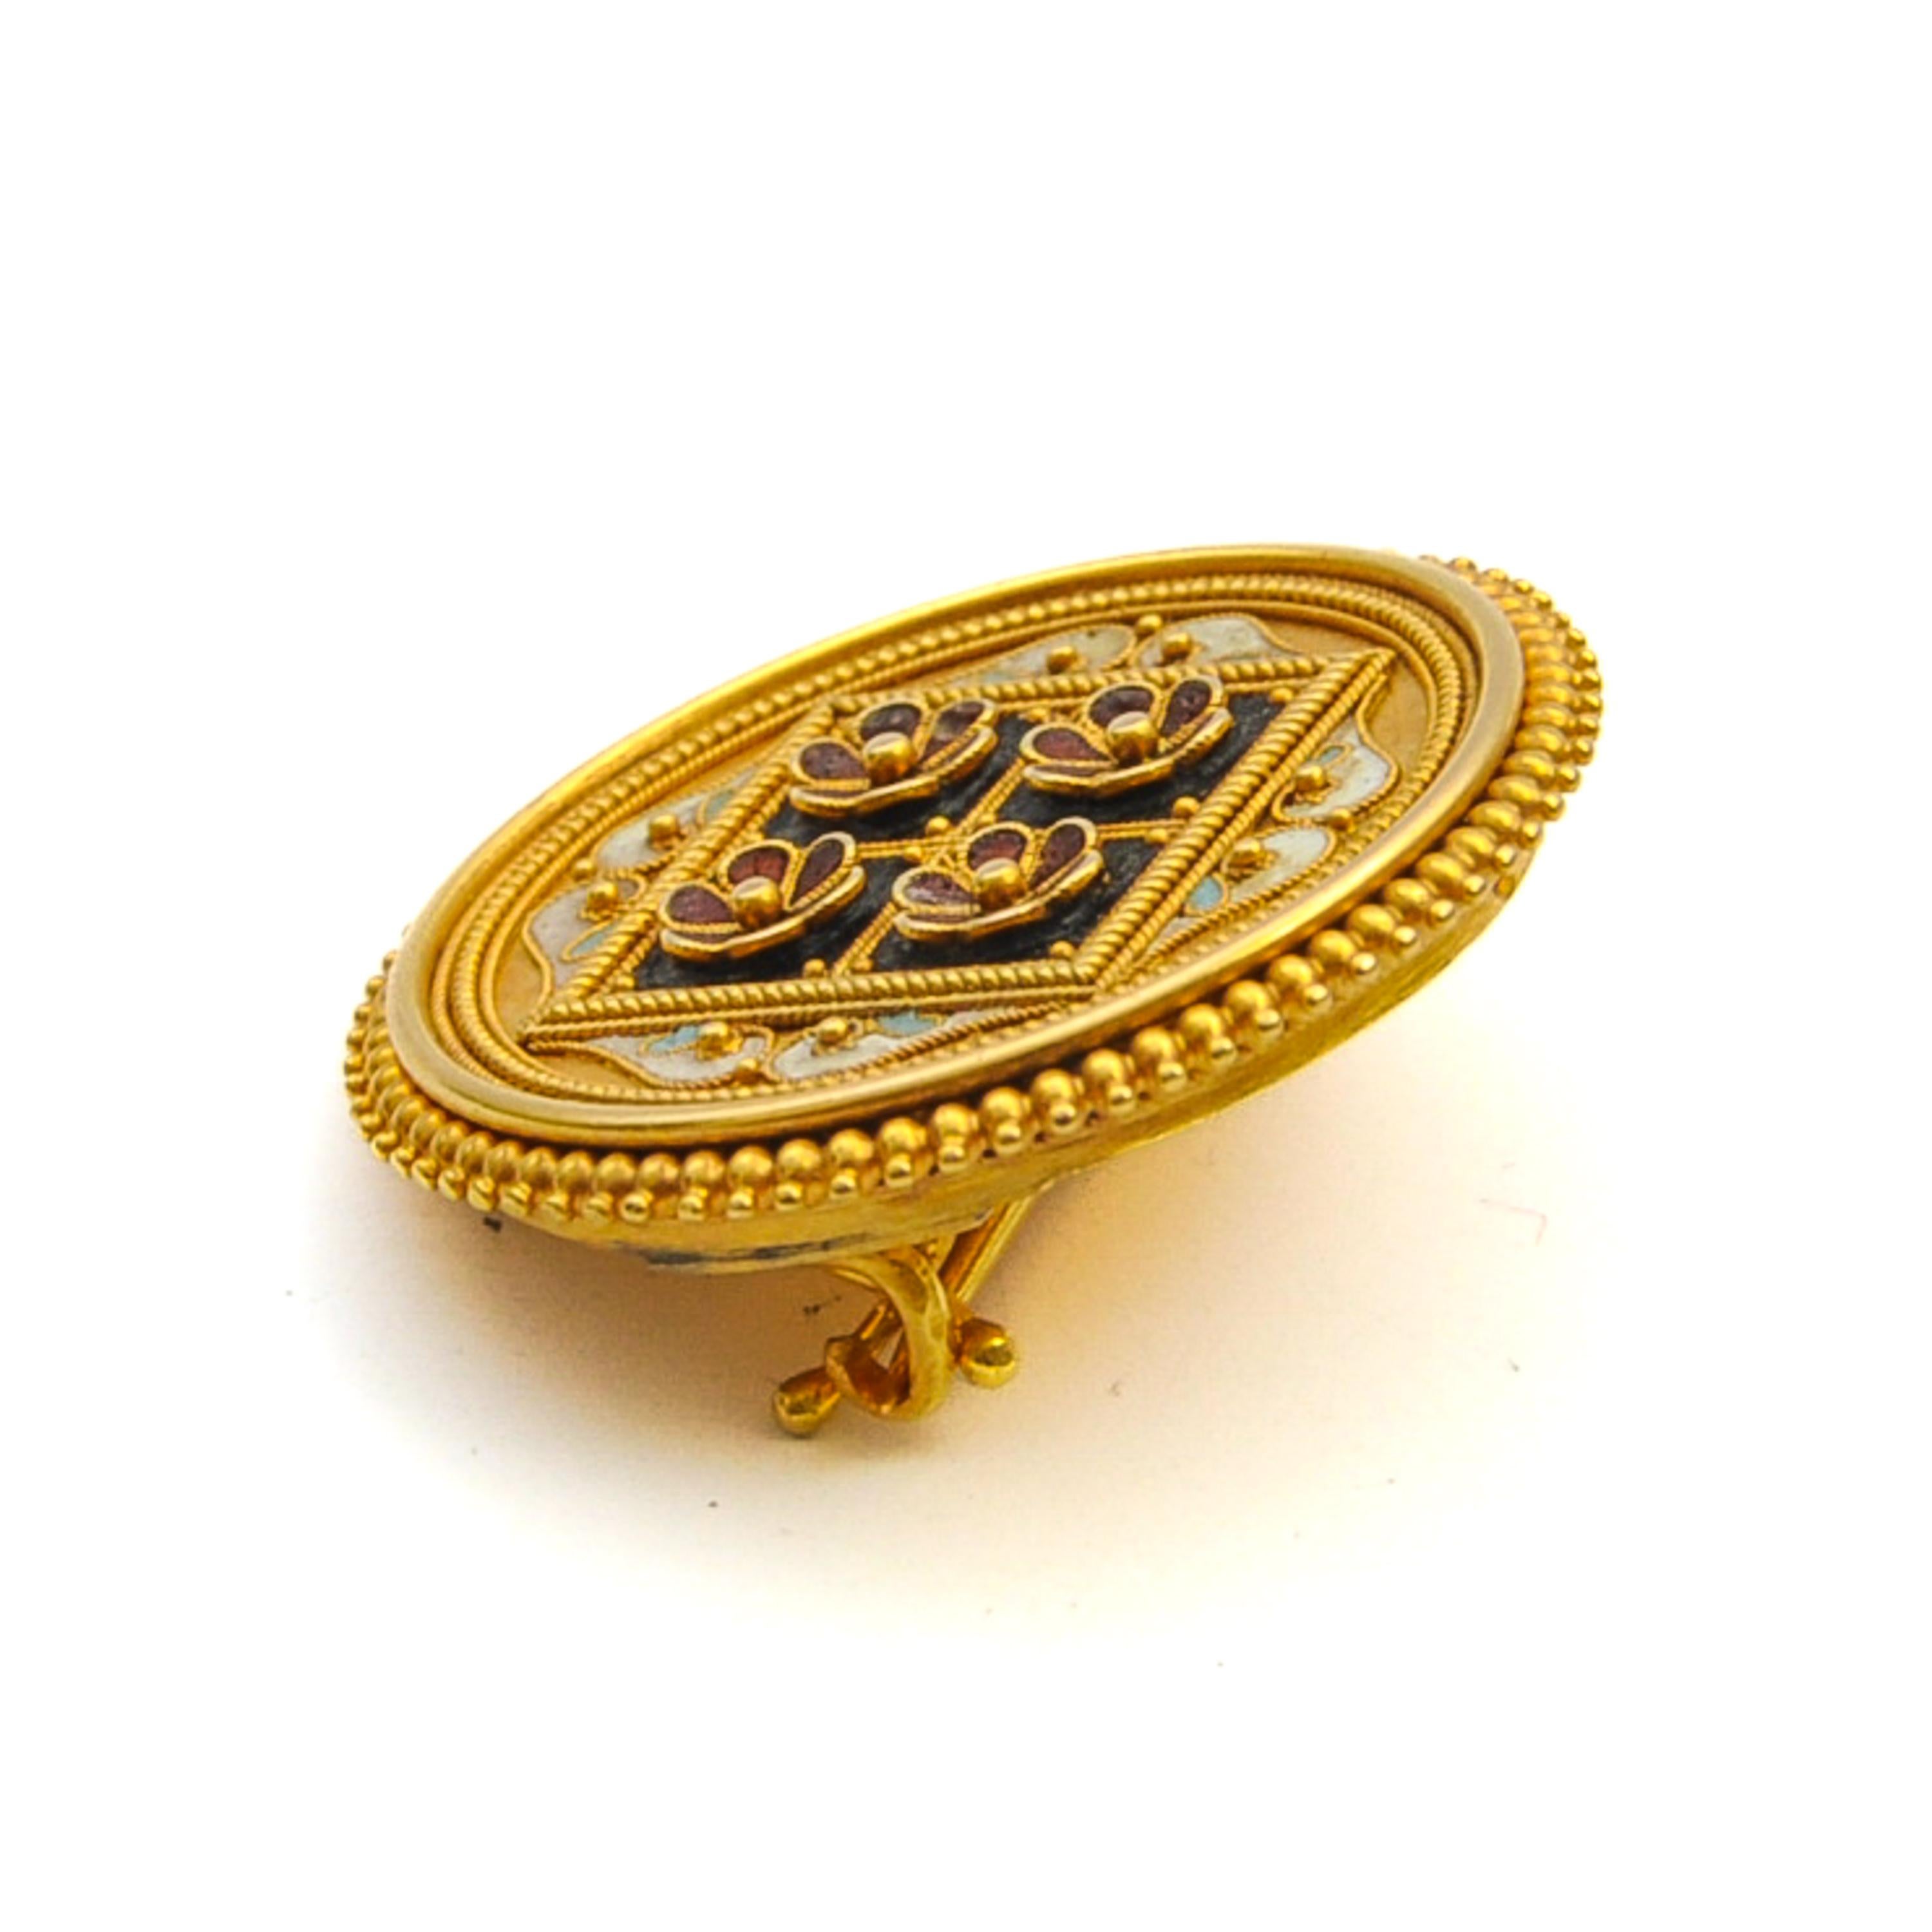 Antique Etruscan Revival Gold and Enamel Floral Pin Brooch In Good Condition For Sale In Rotterdam, NL